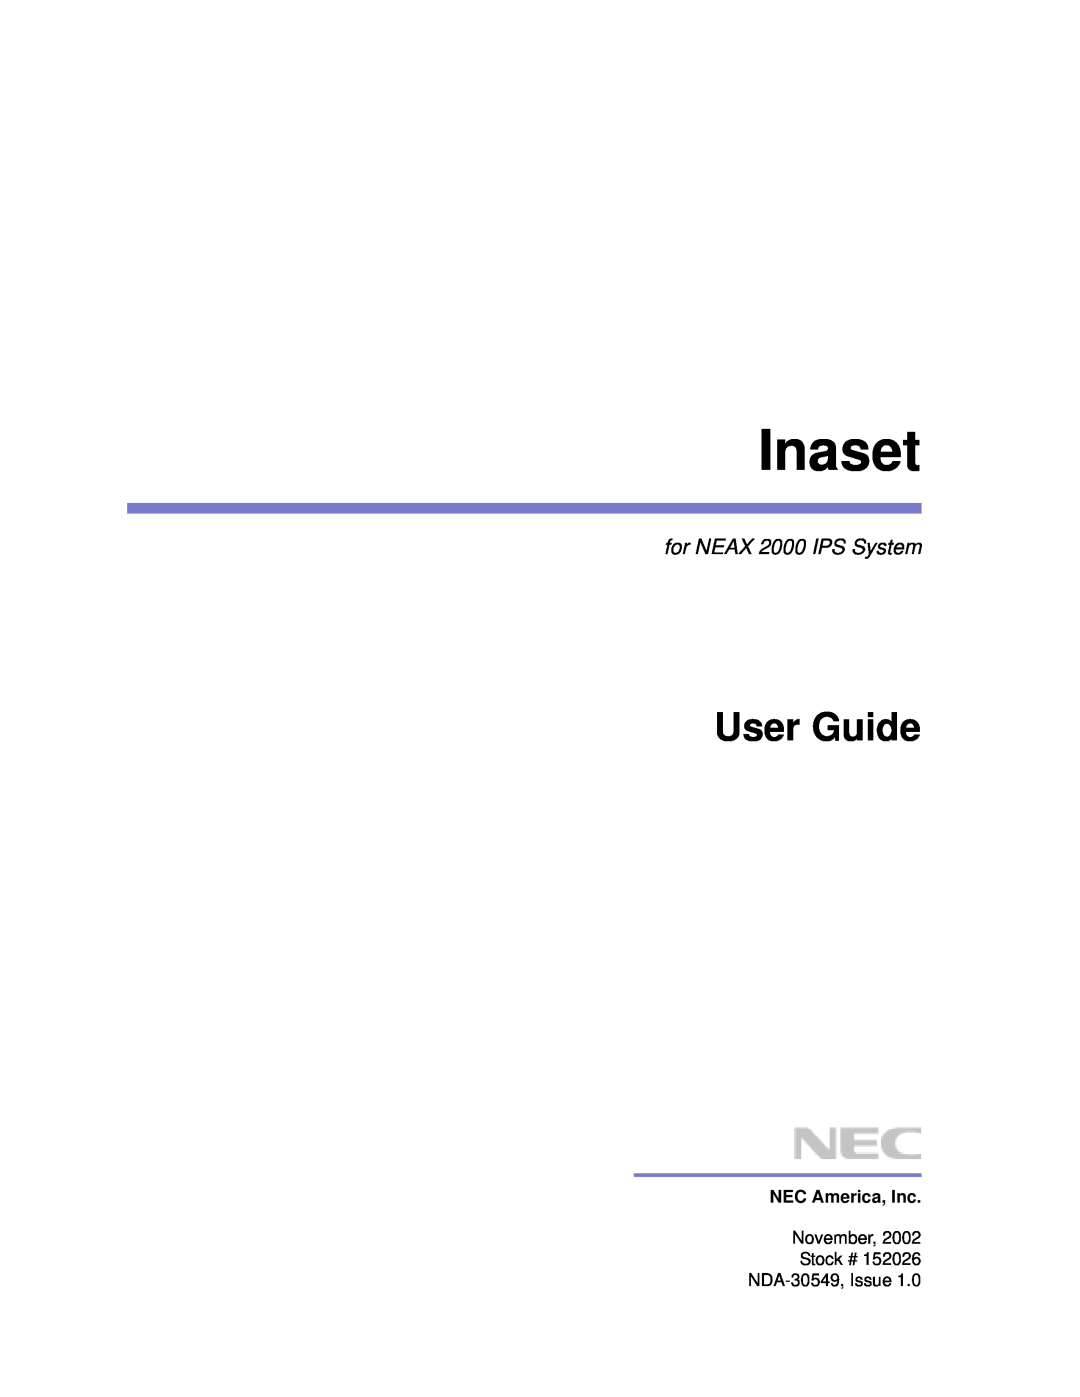 NEC manual NEC America, Inc, Inaset, User Guide, for NEAX 2000 IPS System 